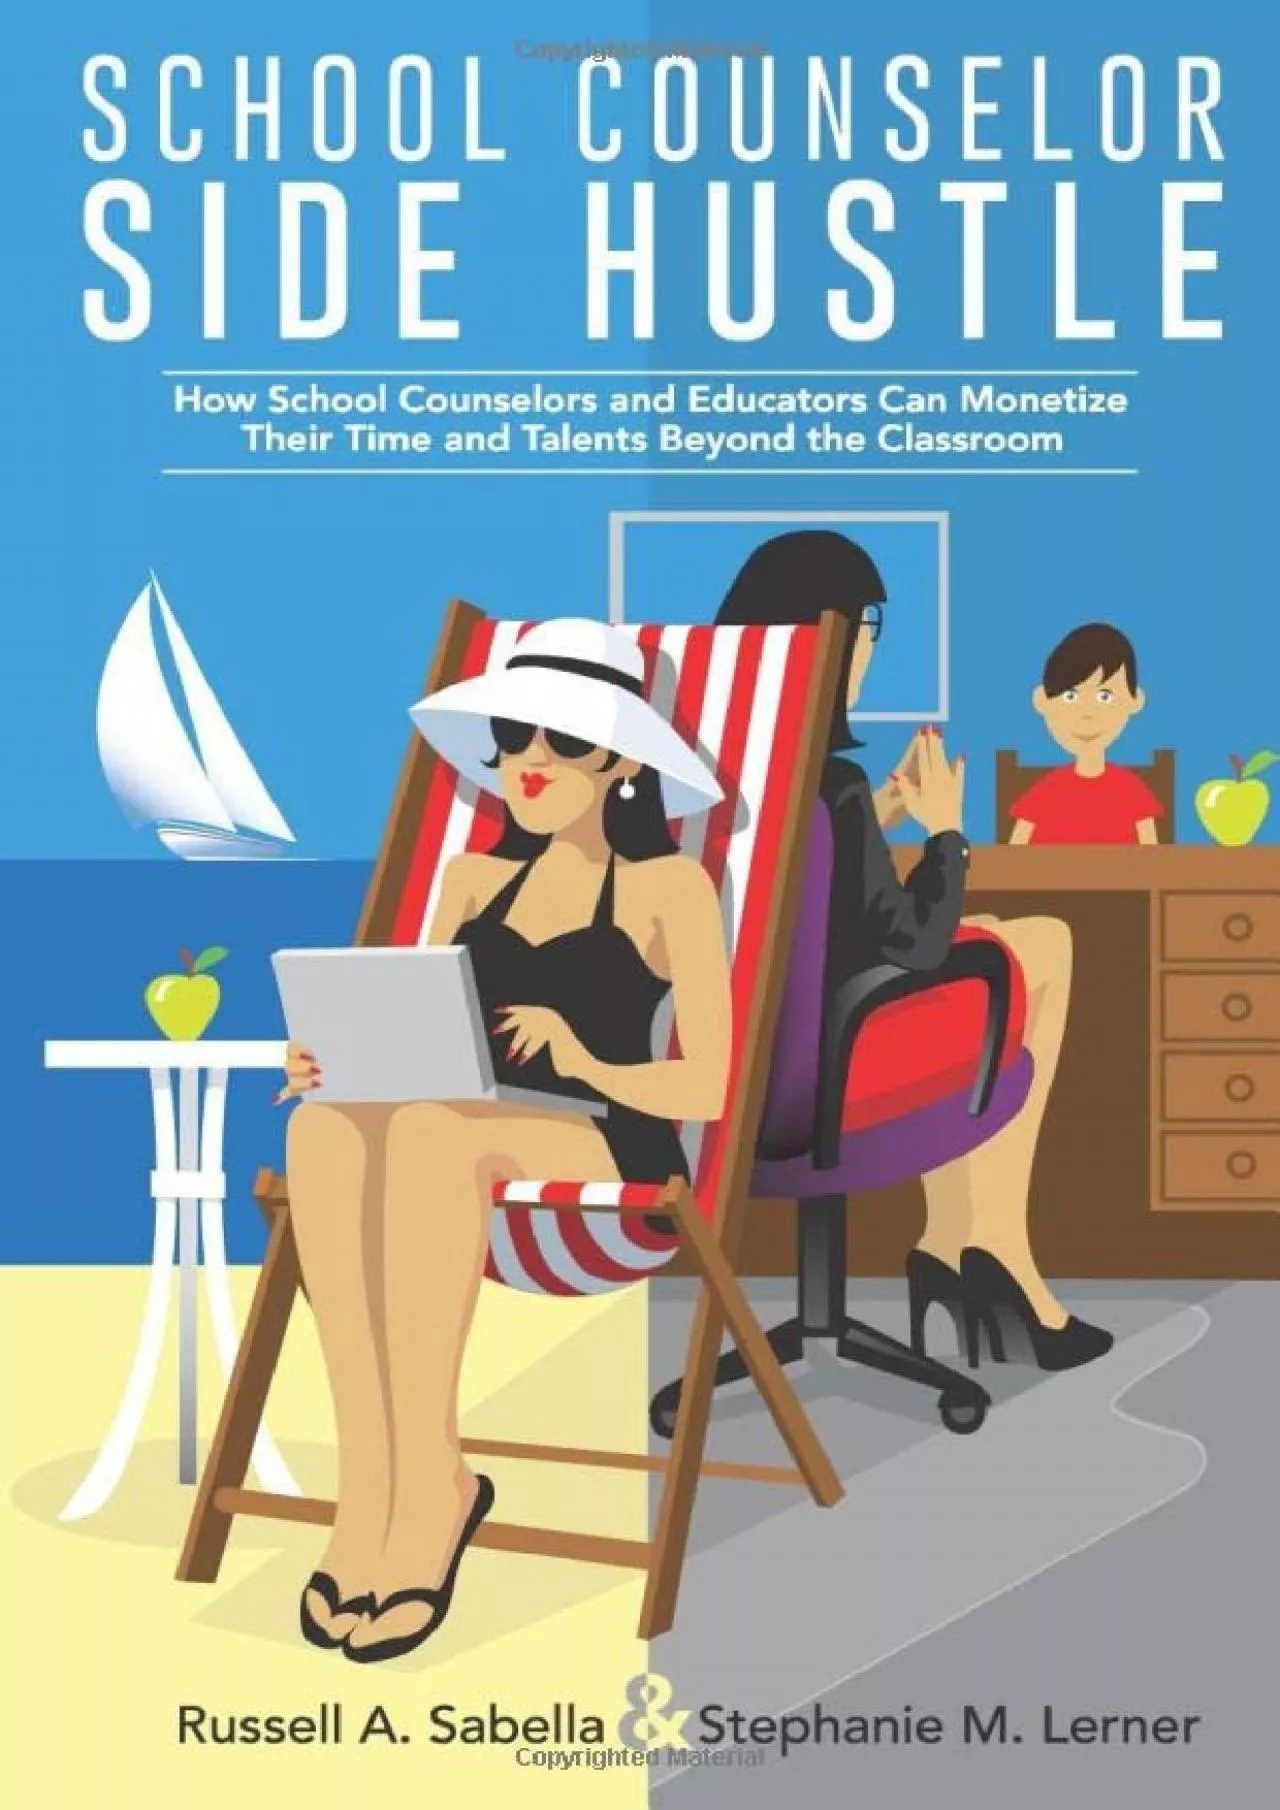 [READ] School Counselor Side Hustle: How School Counselors and Educators Can Monetize